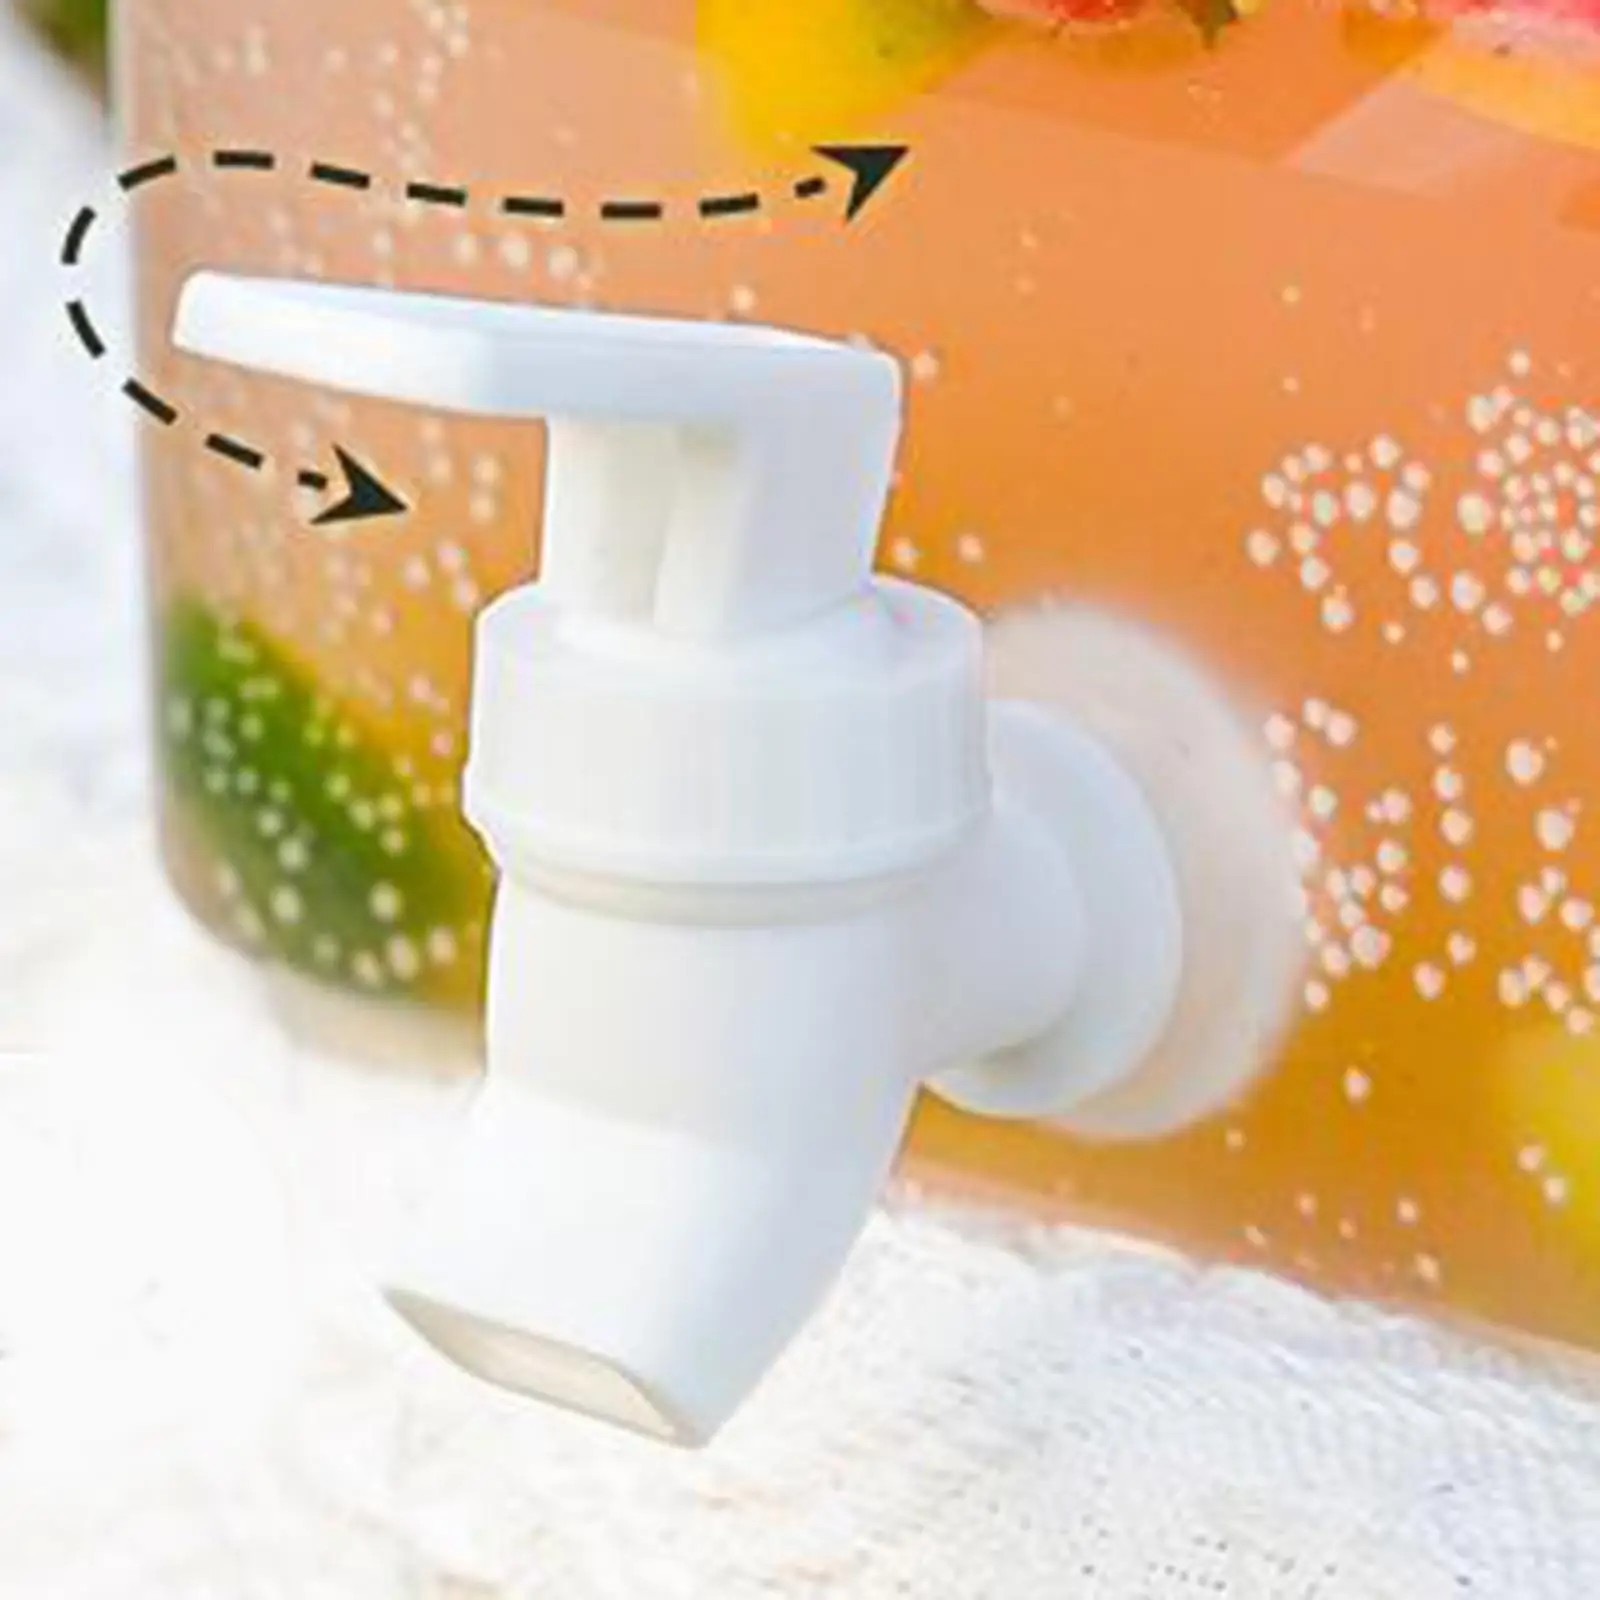 Drink Dispenser No Dripping Large Juice Water Pitcher Leakproof Cold Drinks Juice Dispensers for Home Kitchen Restaurant Camping